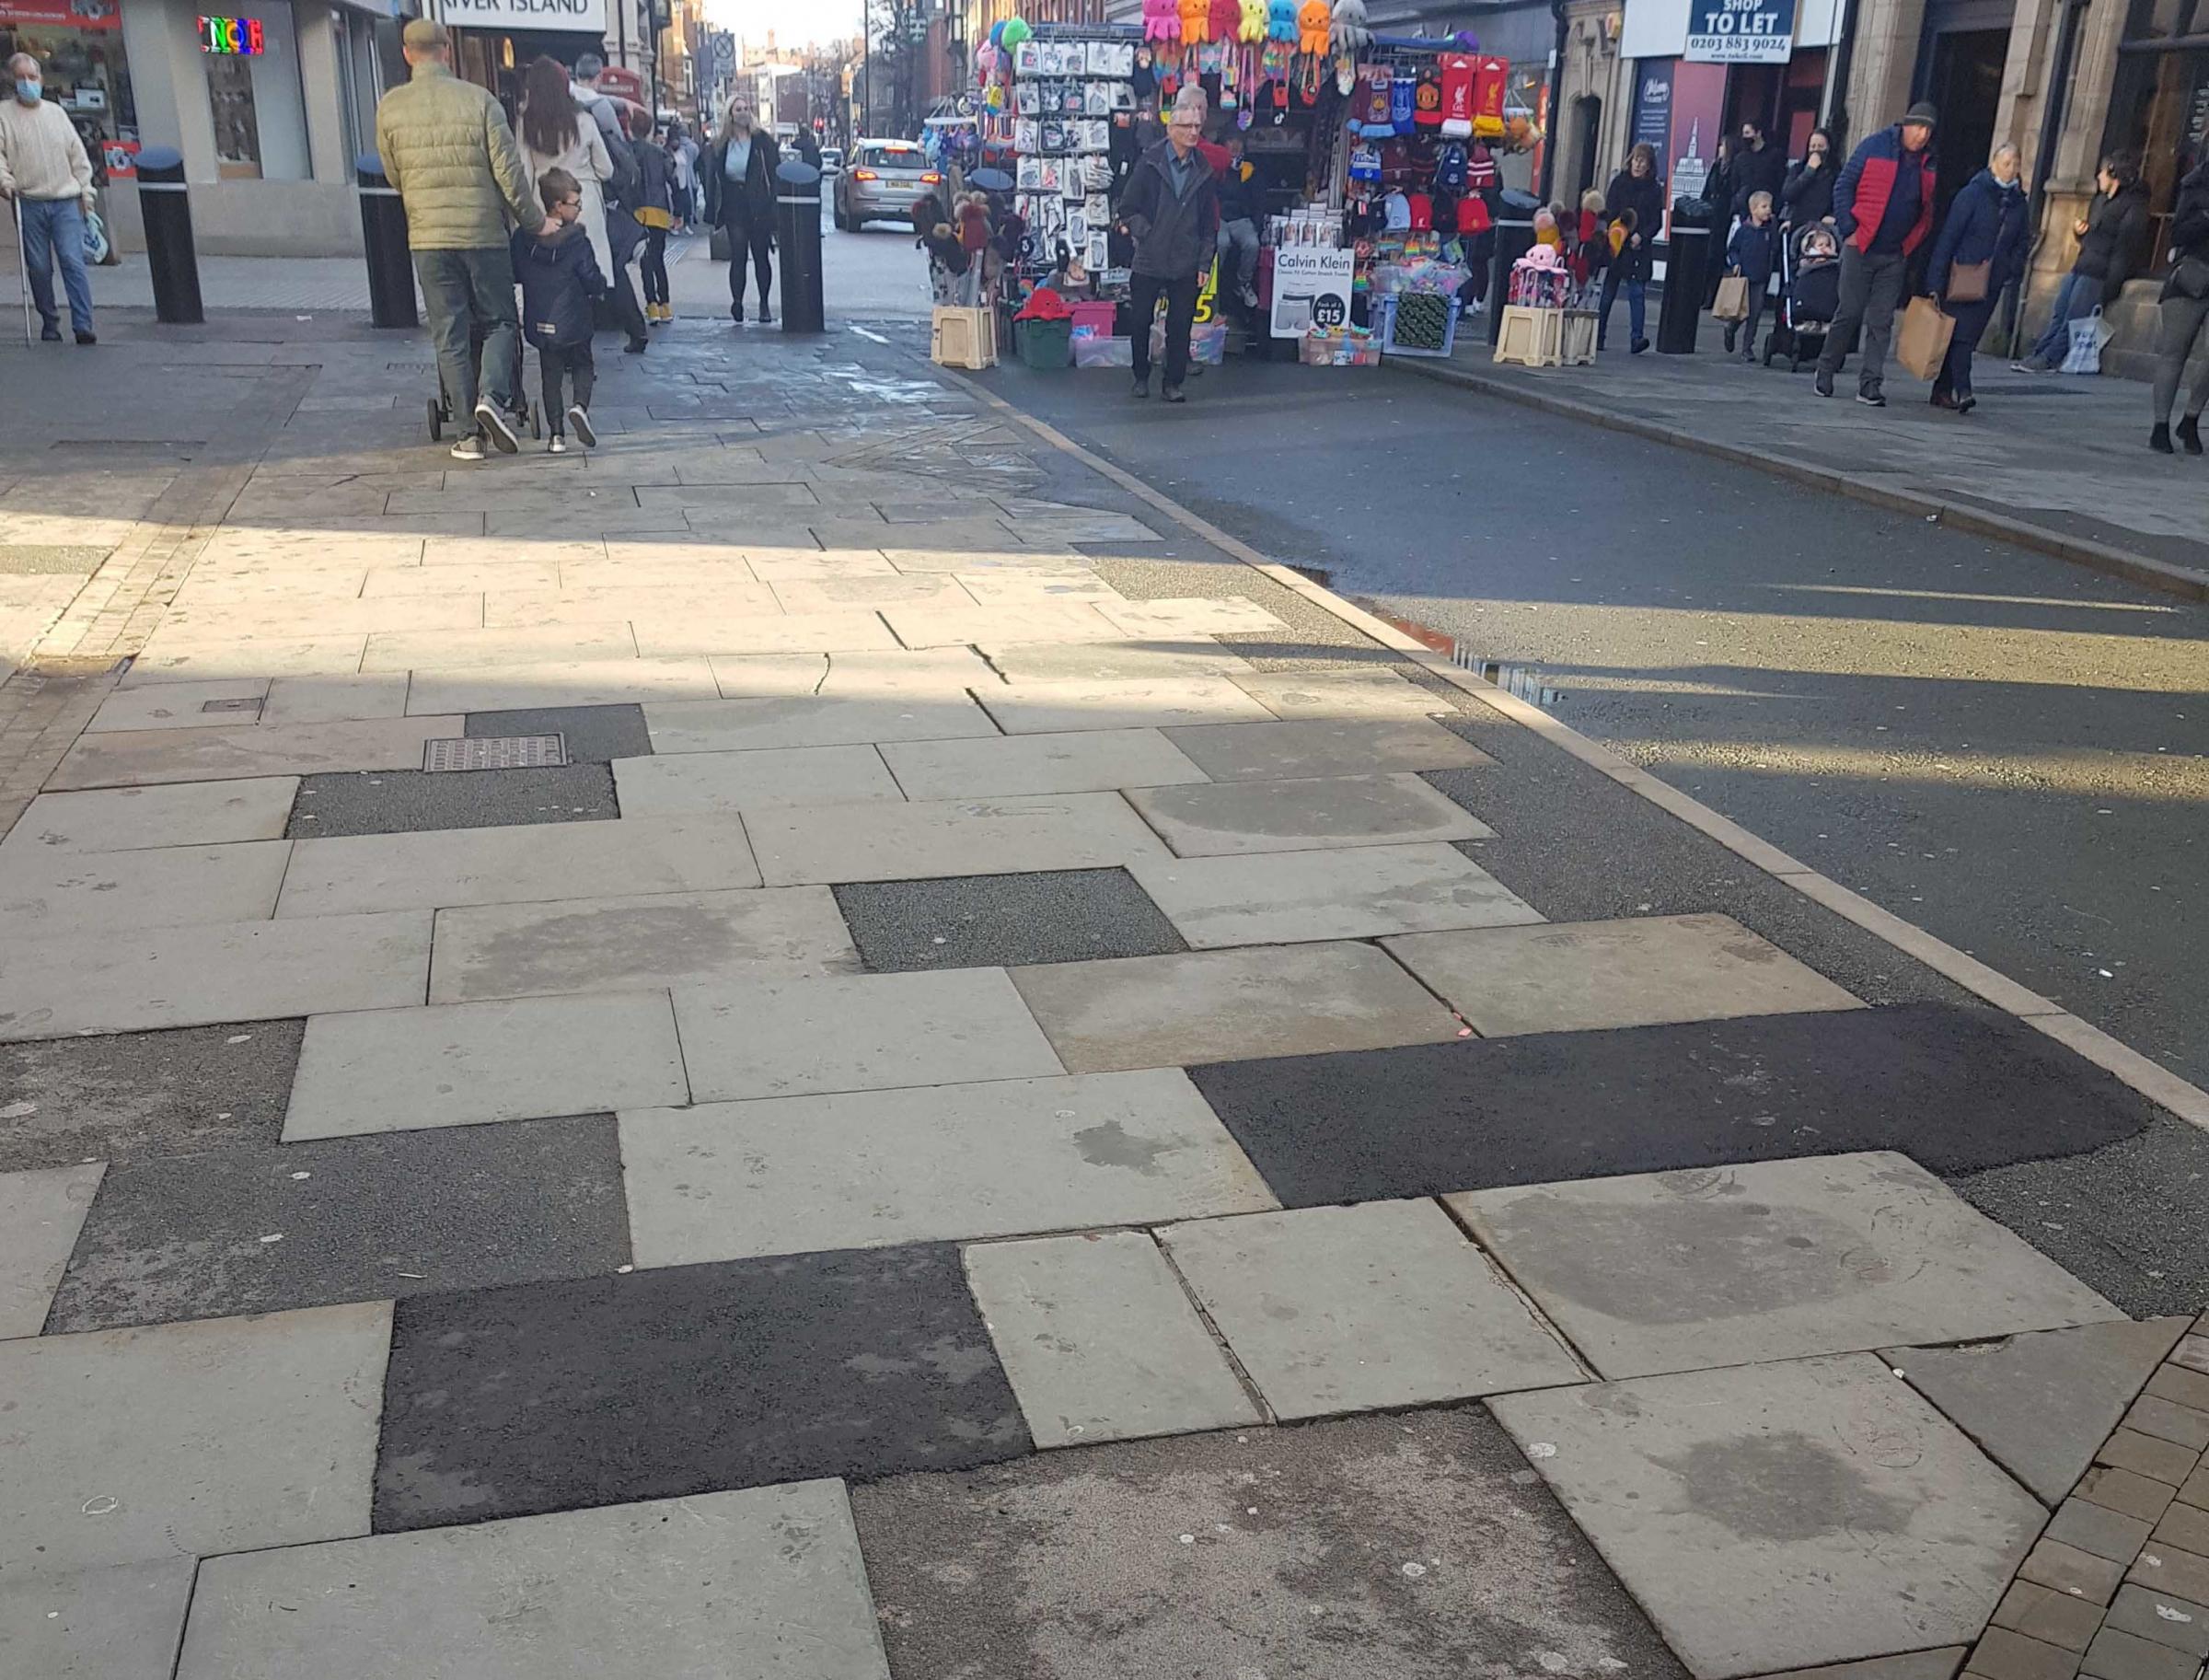 The Bad and Ugly – Poor repairs to paving.